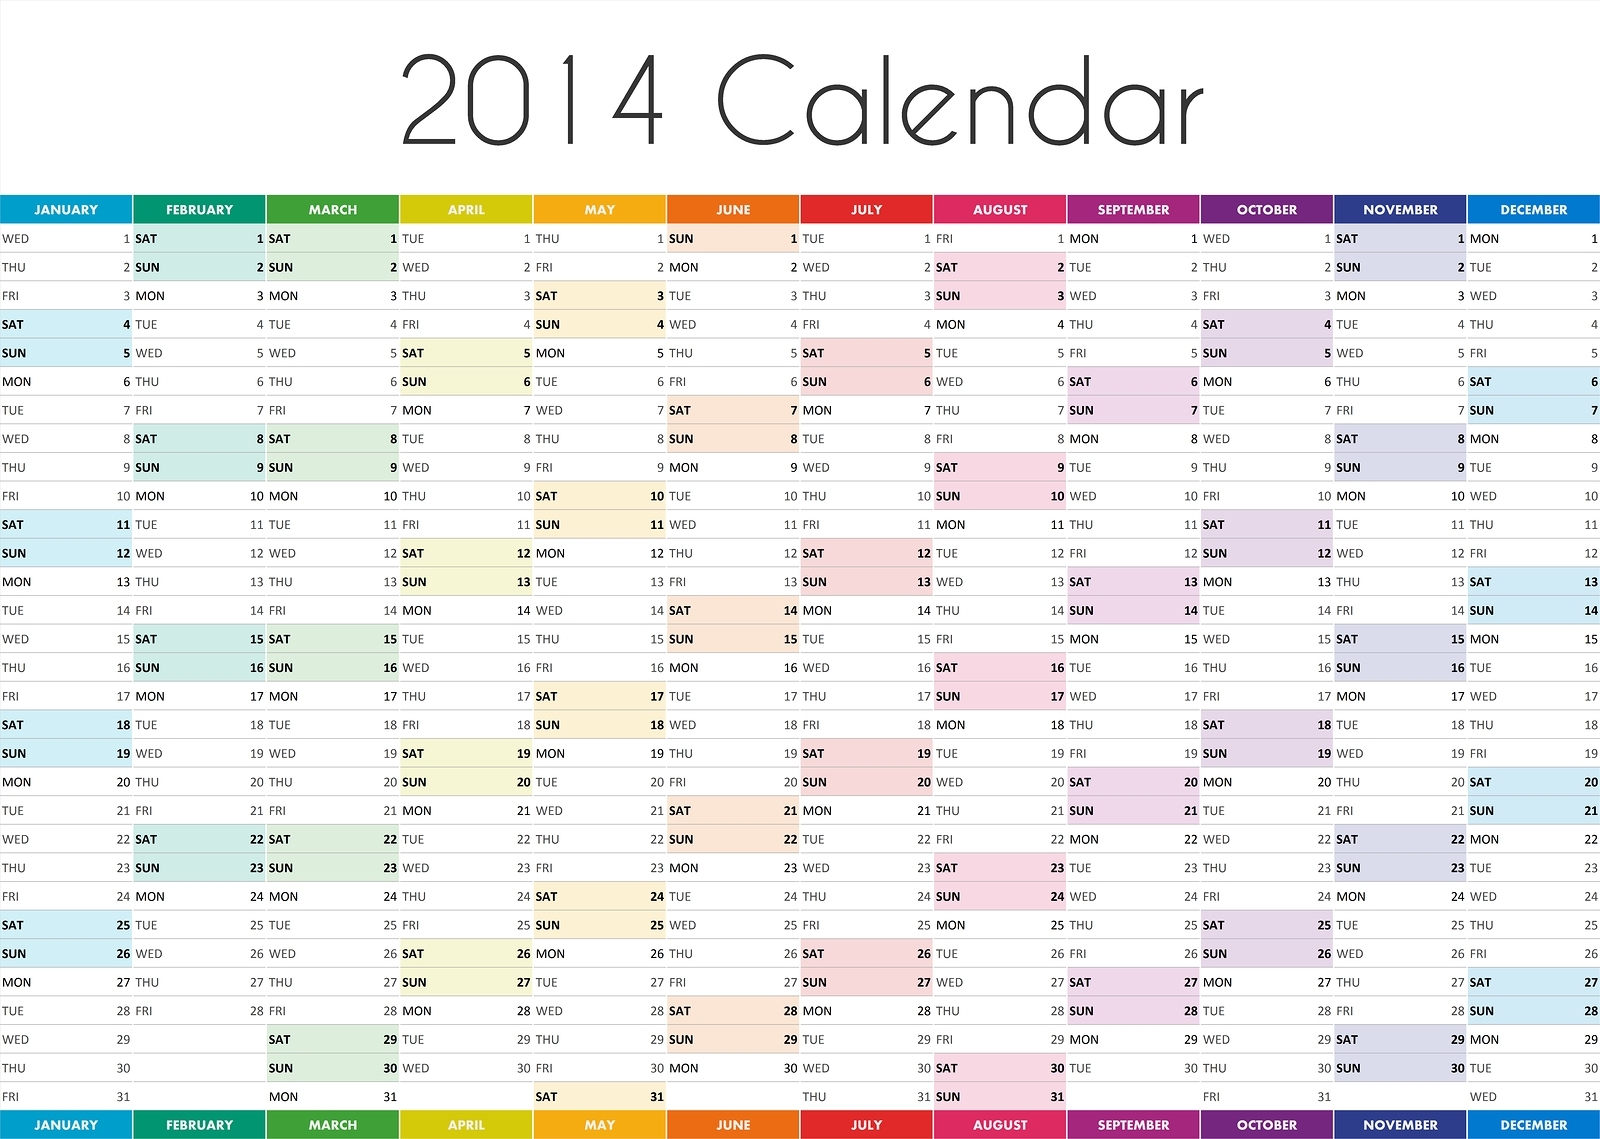 Monthly Calendar With Time Slots | Week Printable Calendar intended for Blank Calendar With Time Slots